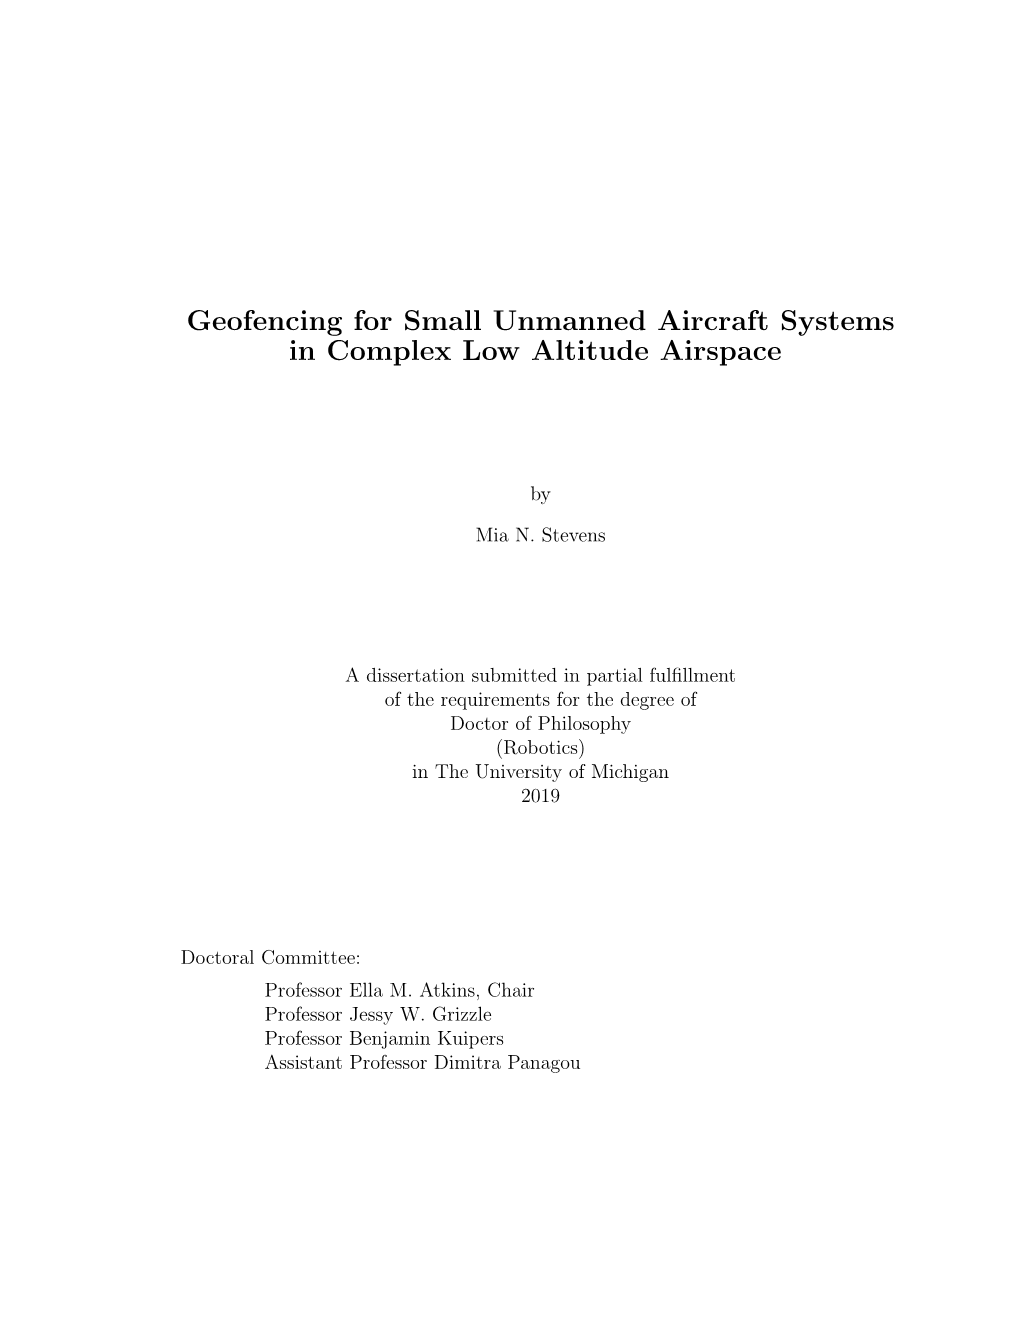 Geofencing for Small Unmanned Aircraft Systems in Complex Low Altitude Airspace